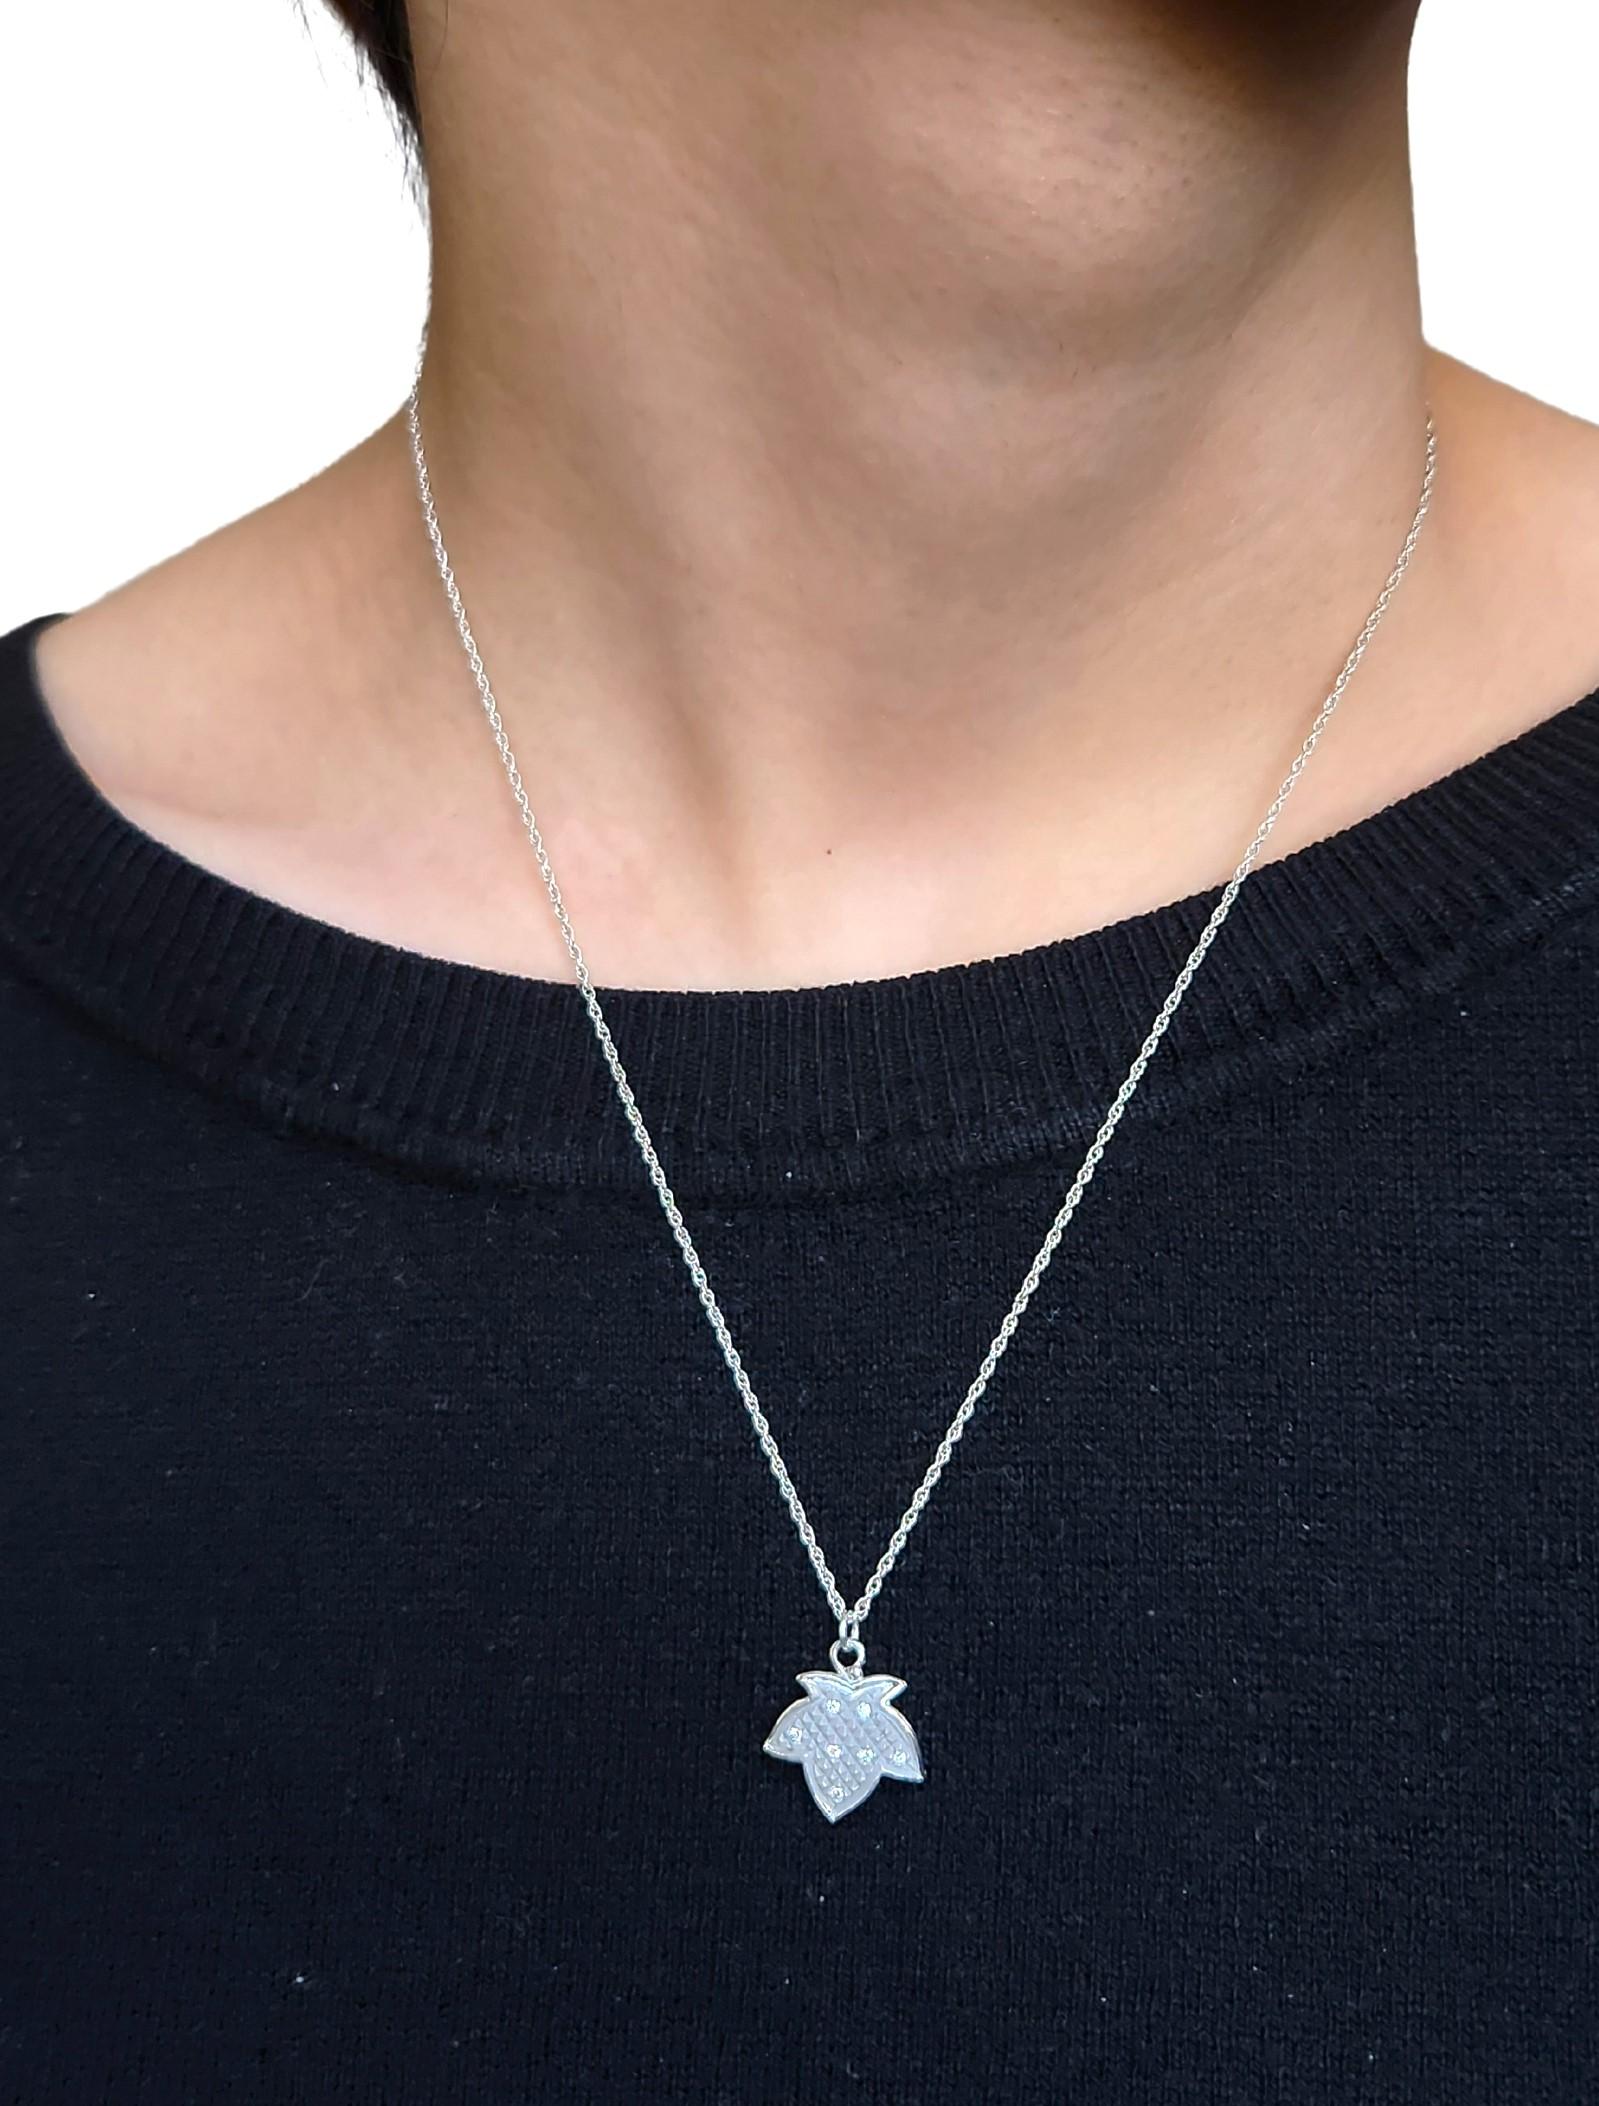 Stack the Small Maple Leaf with the Large Maple Leaf either in Platinum and Diamonds or 18K Yellow Gold for a two tone look. The Leaf plays a particular strong place in Alison Nagasue's collections. The Maple leaf is a beautiful shape and a common